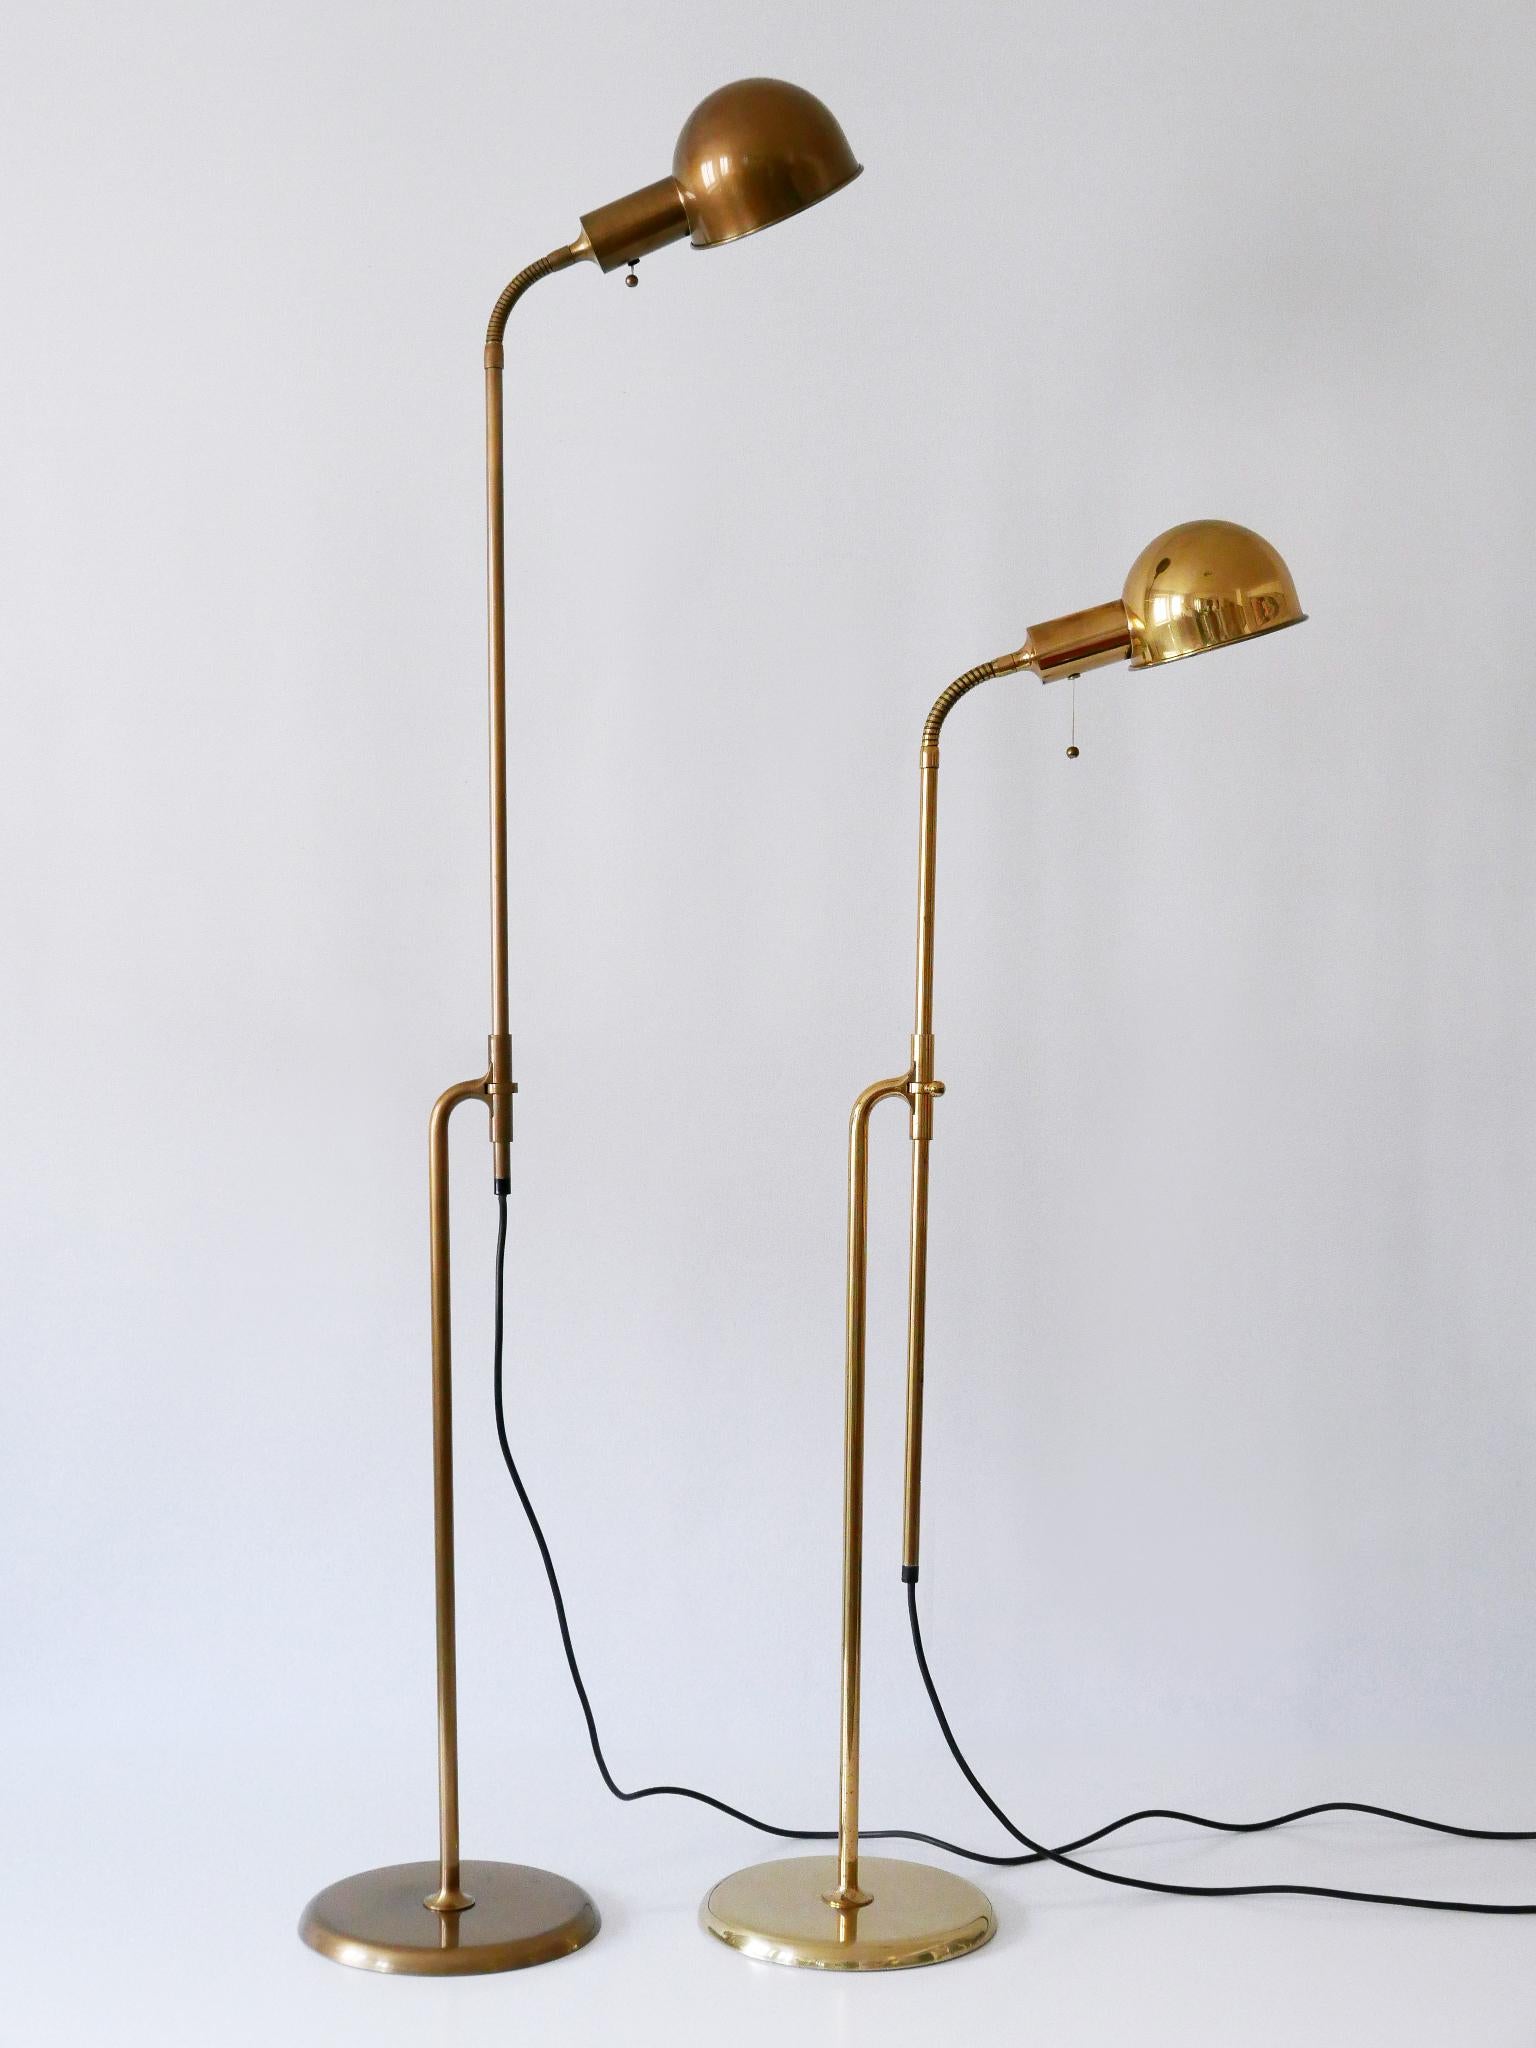 Set of Two Mid-Century Modern Reading Floor Lamps 'Bola' by Florian Schulz 1970s For Sale 2